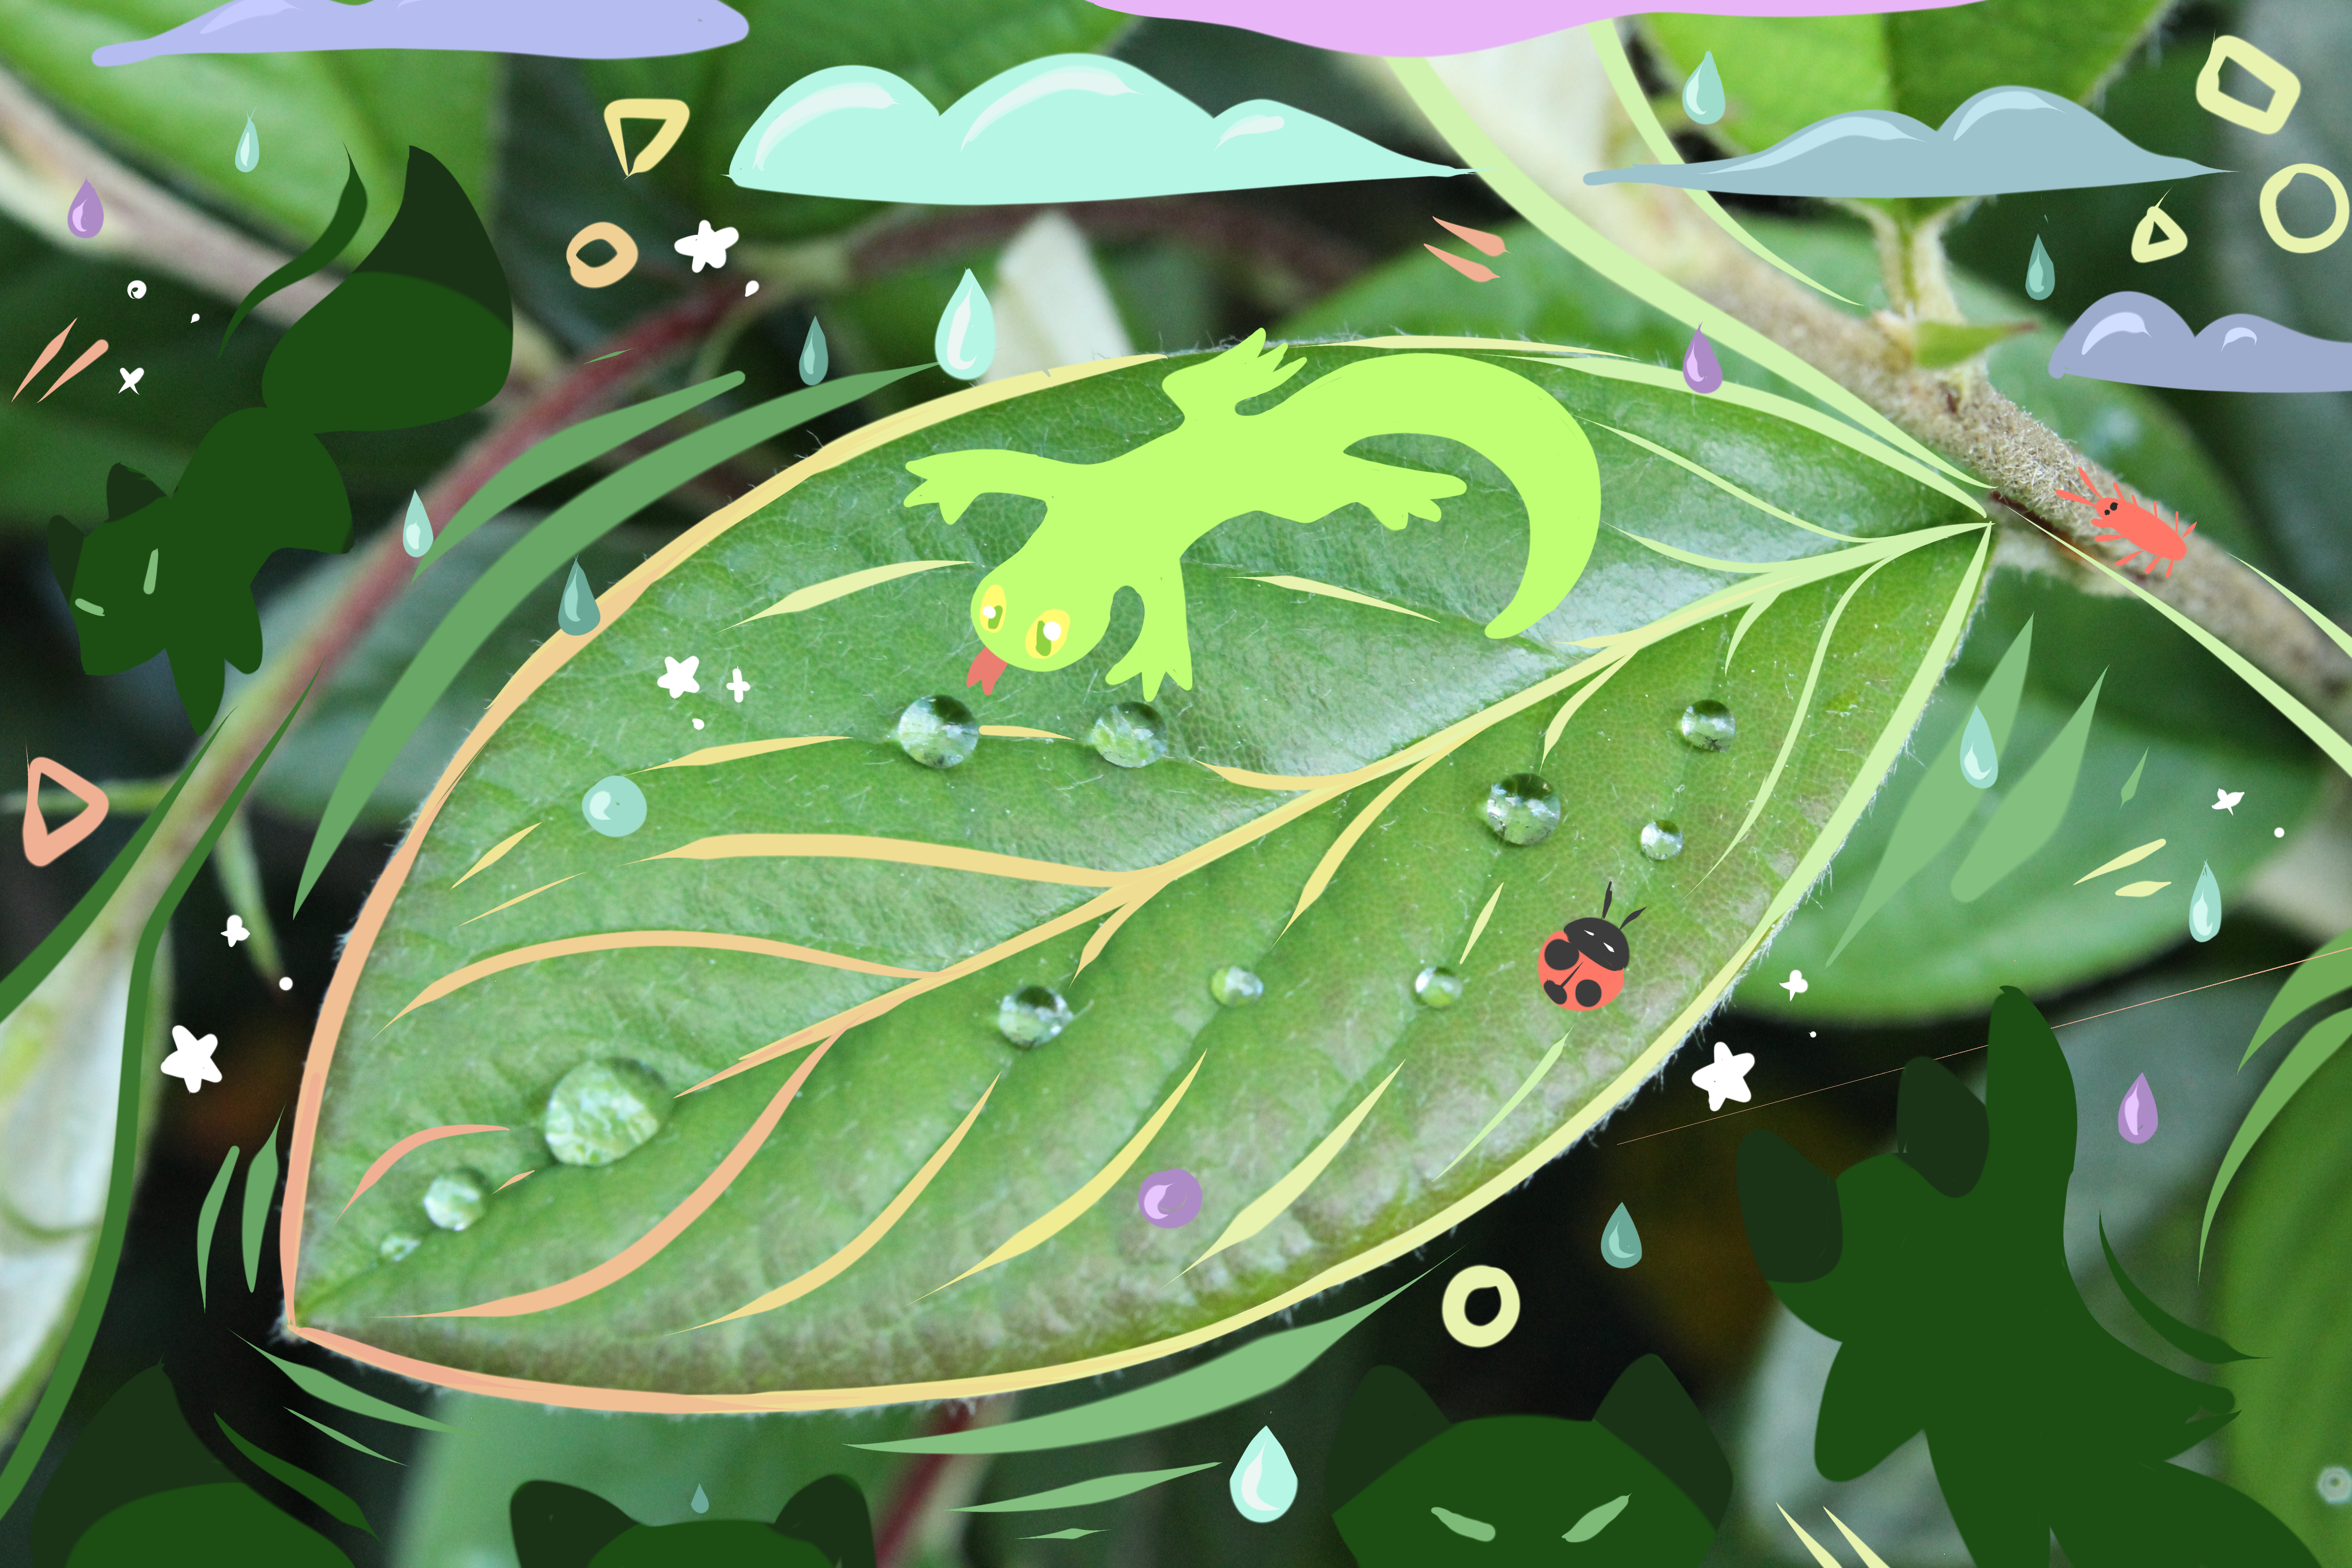 A close up photograph of a leaf with water droplets on it, colorful lines and shapes are added to it, with small animals such as lizards and bugs drawn in the foreground of the image.